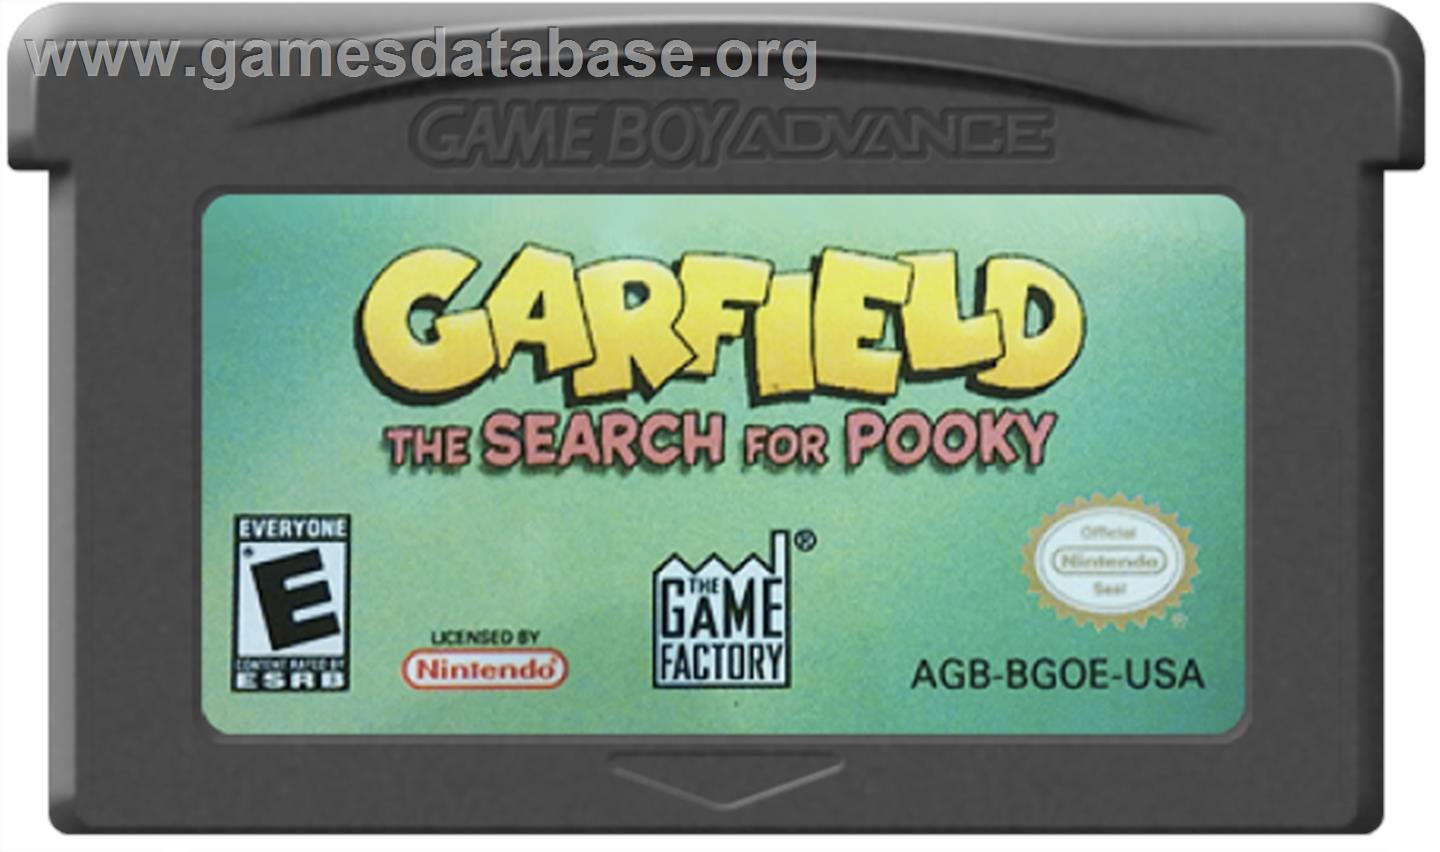 Garfield: The Search for Pooky - Nintendo Game Boy Advance - Artwork - Cartridge